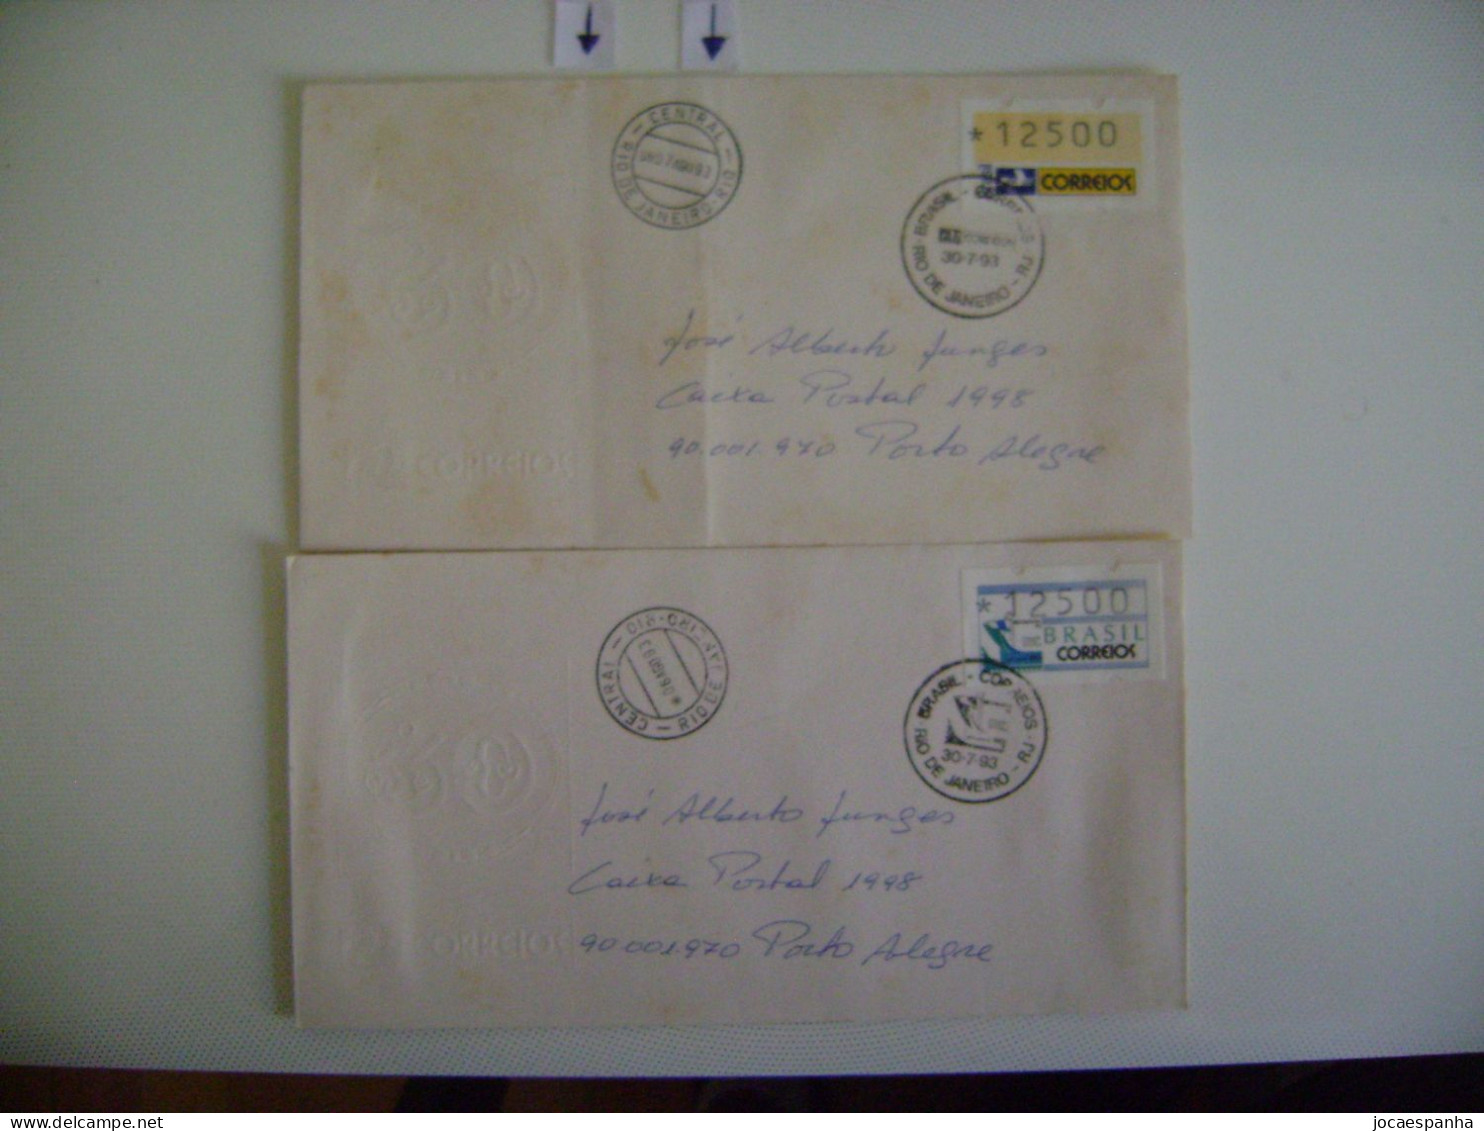 BRAZIL / BRASIL  - FOUR ENVELOPES CIRCULATED WITH AUTOMATED STAMPS IN 1993 IN THE STATE - Franking Labels